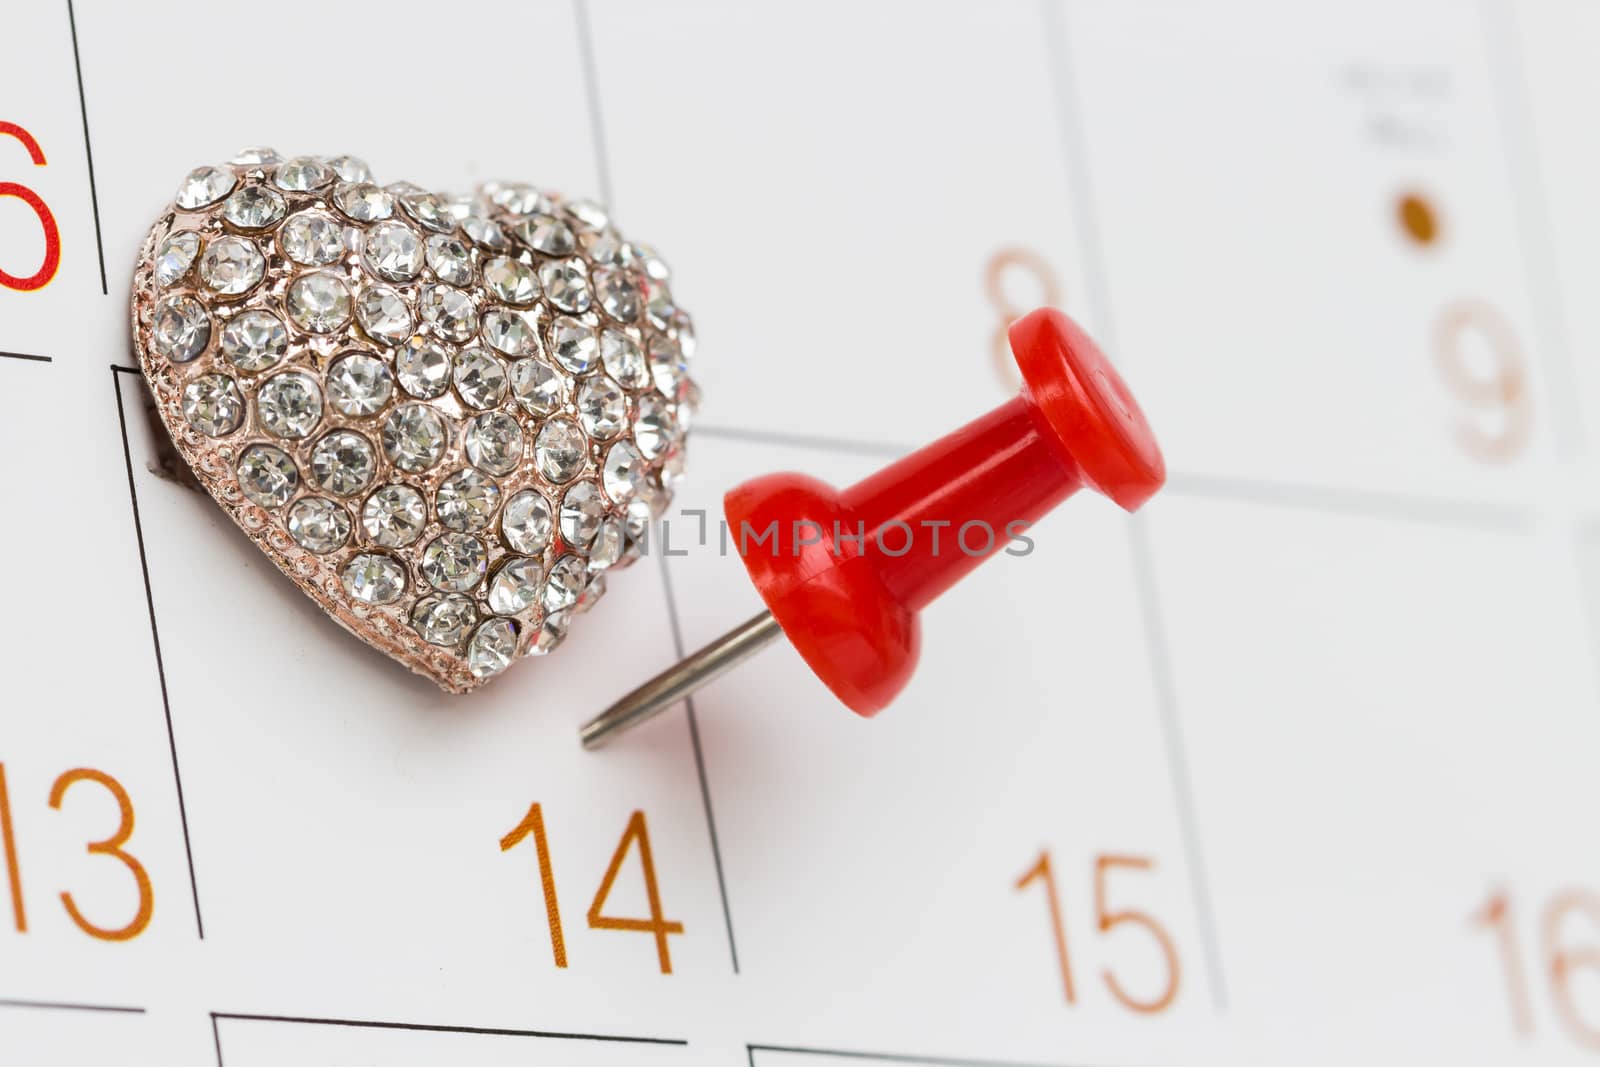 pitch peg on calendar and love symbol fourteen love day